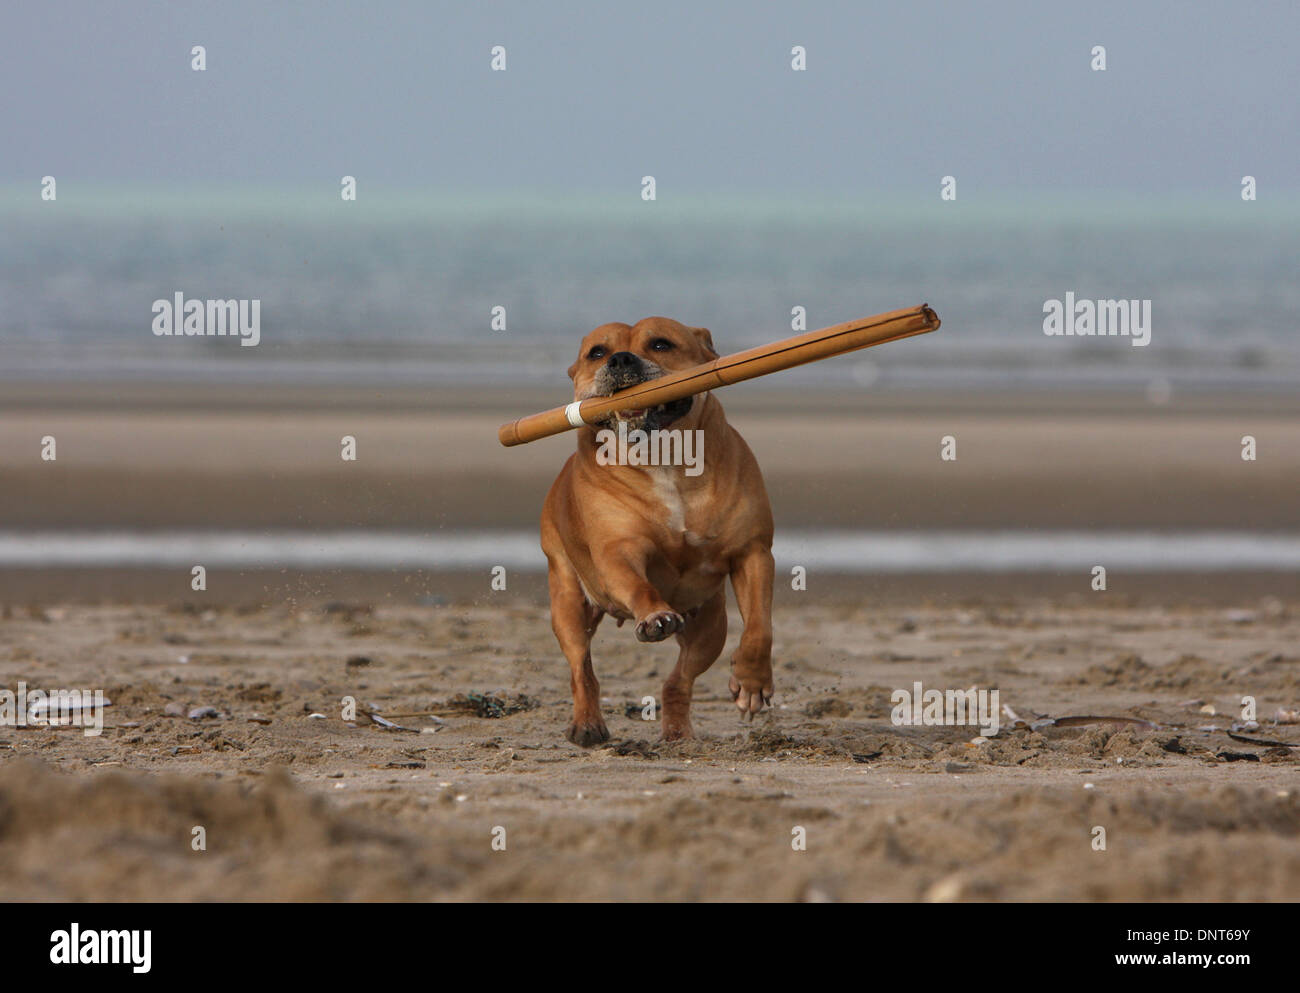 dog Staffordshire Bull Terrier / Staffie   adult running with a stick in its mouth on the beach Stock Photo